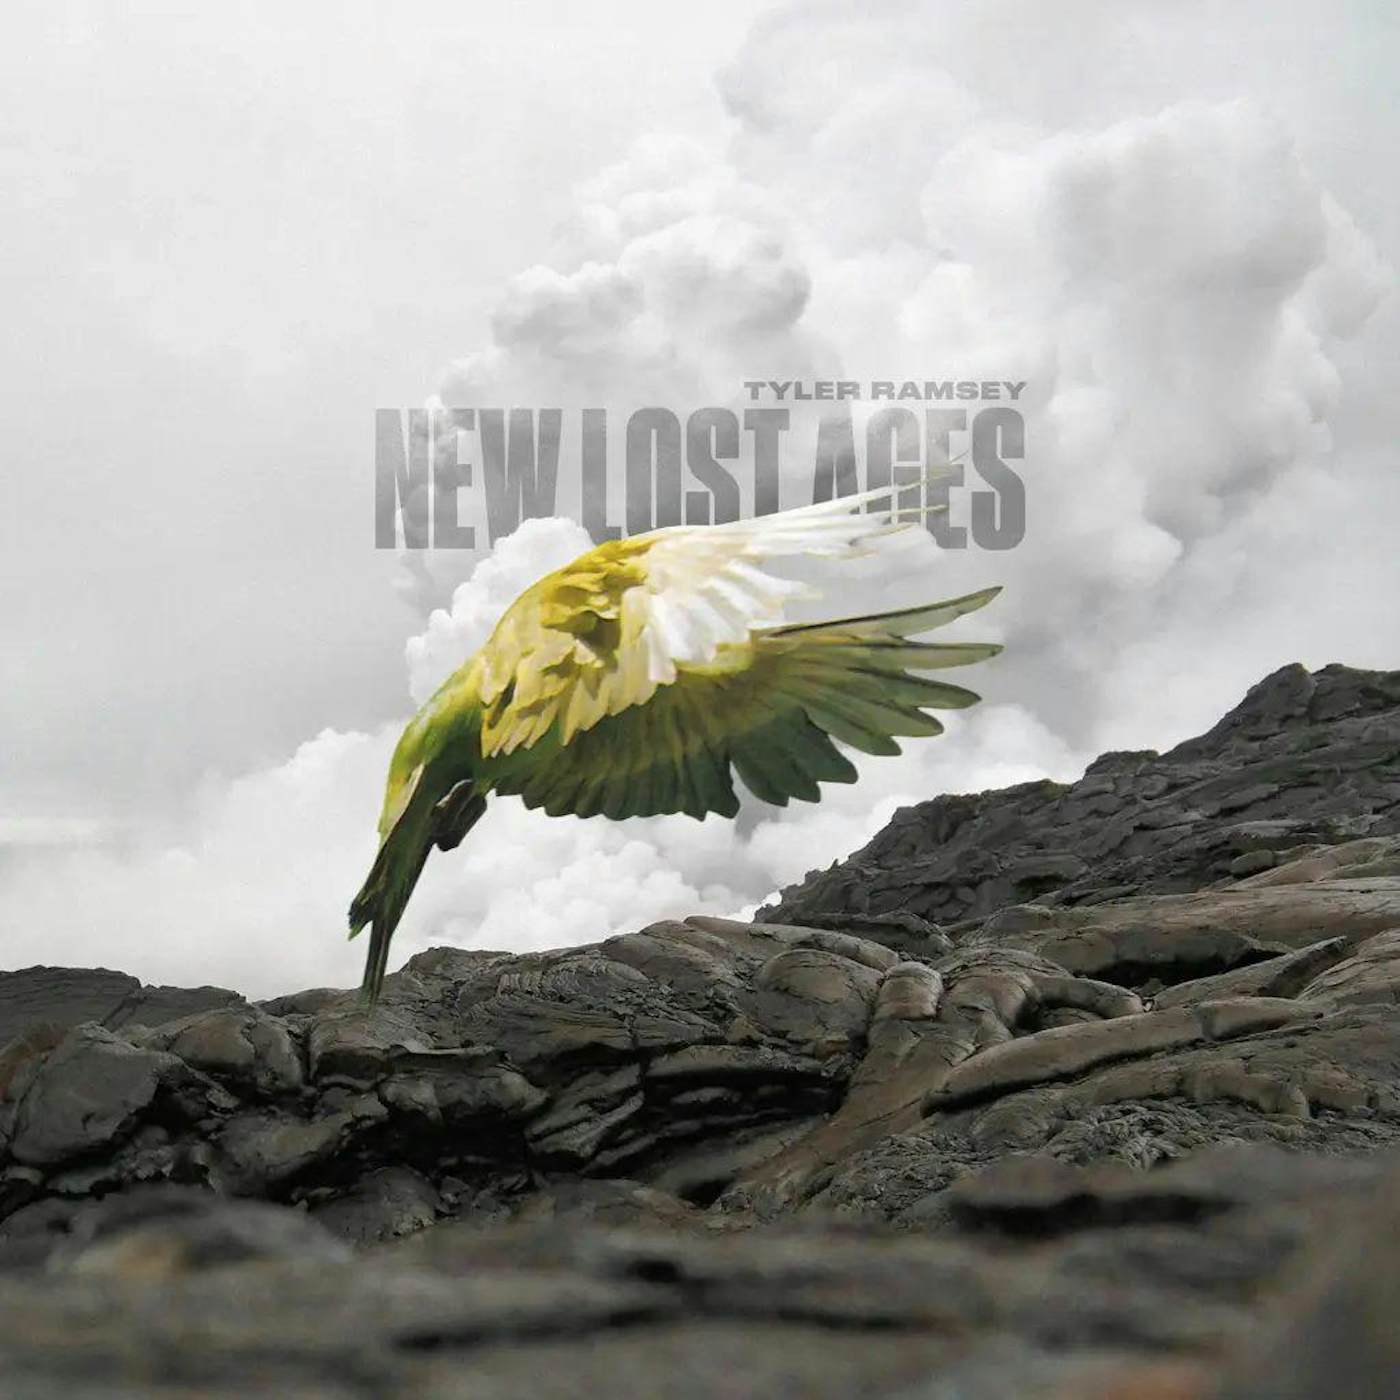 Tyler Ramsey New Lost Ages (Natural Warm Grey Vinyl Record) 